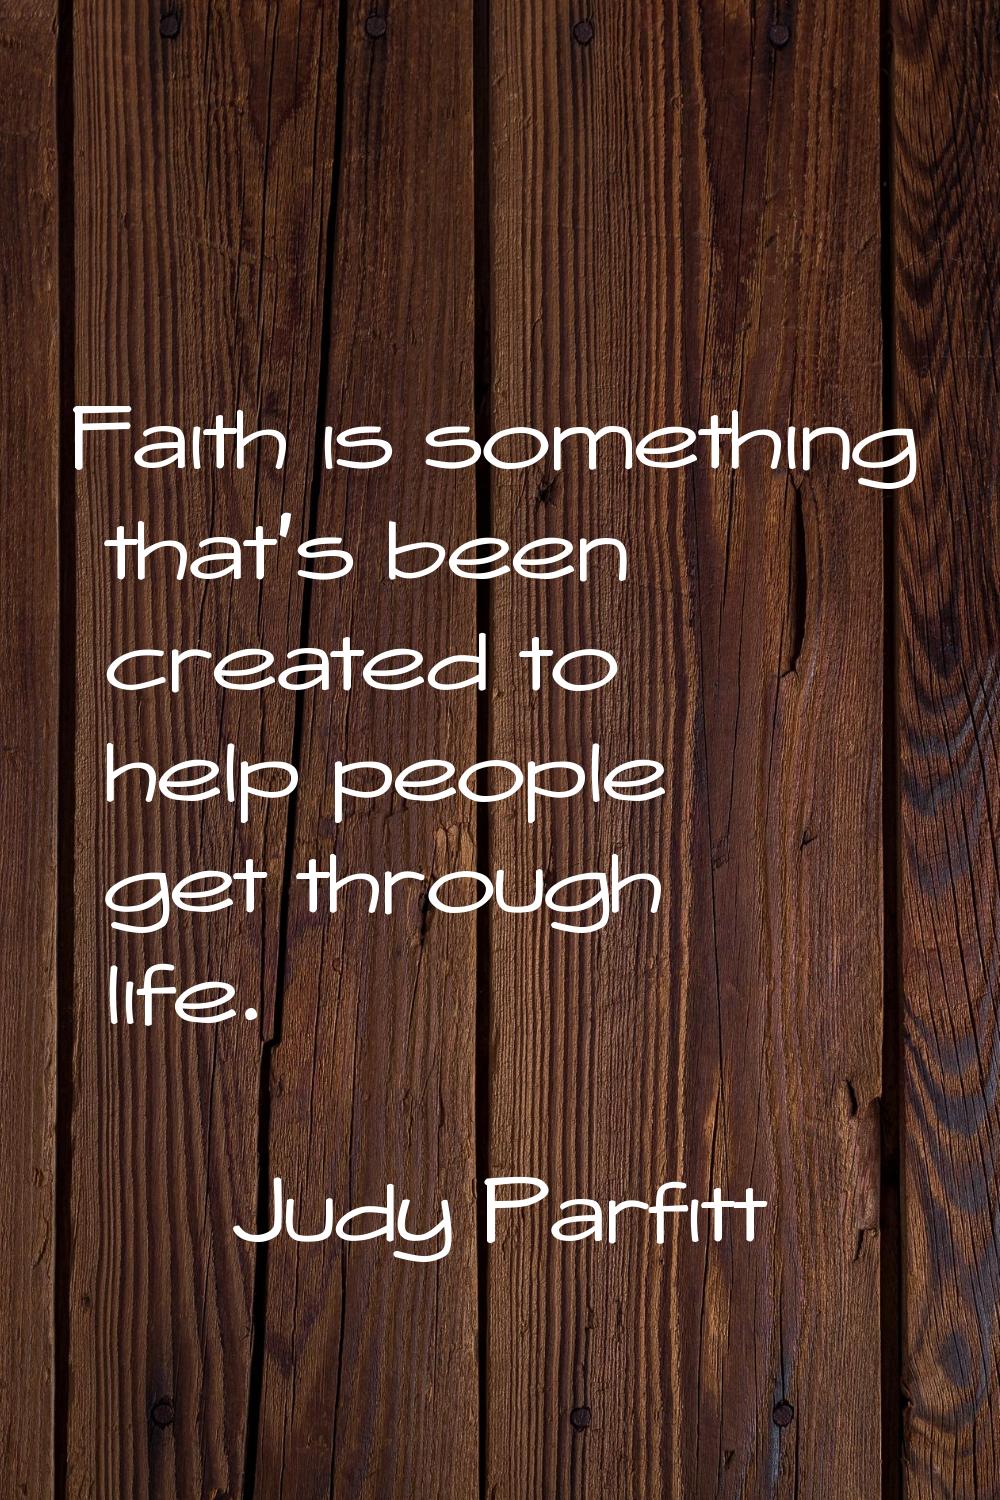 Faith is something that's been created to help people get through life.